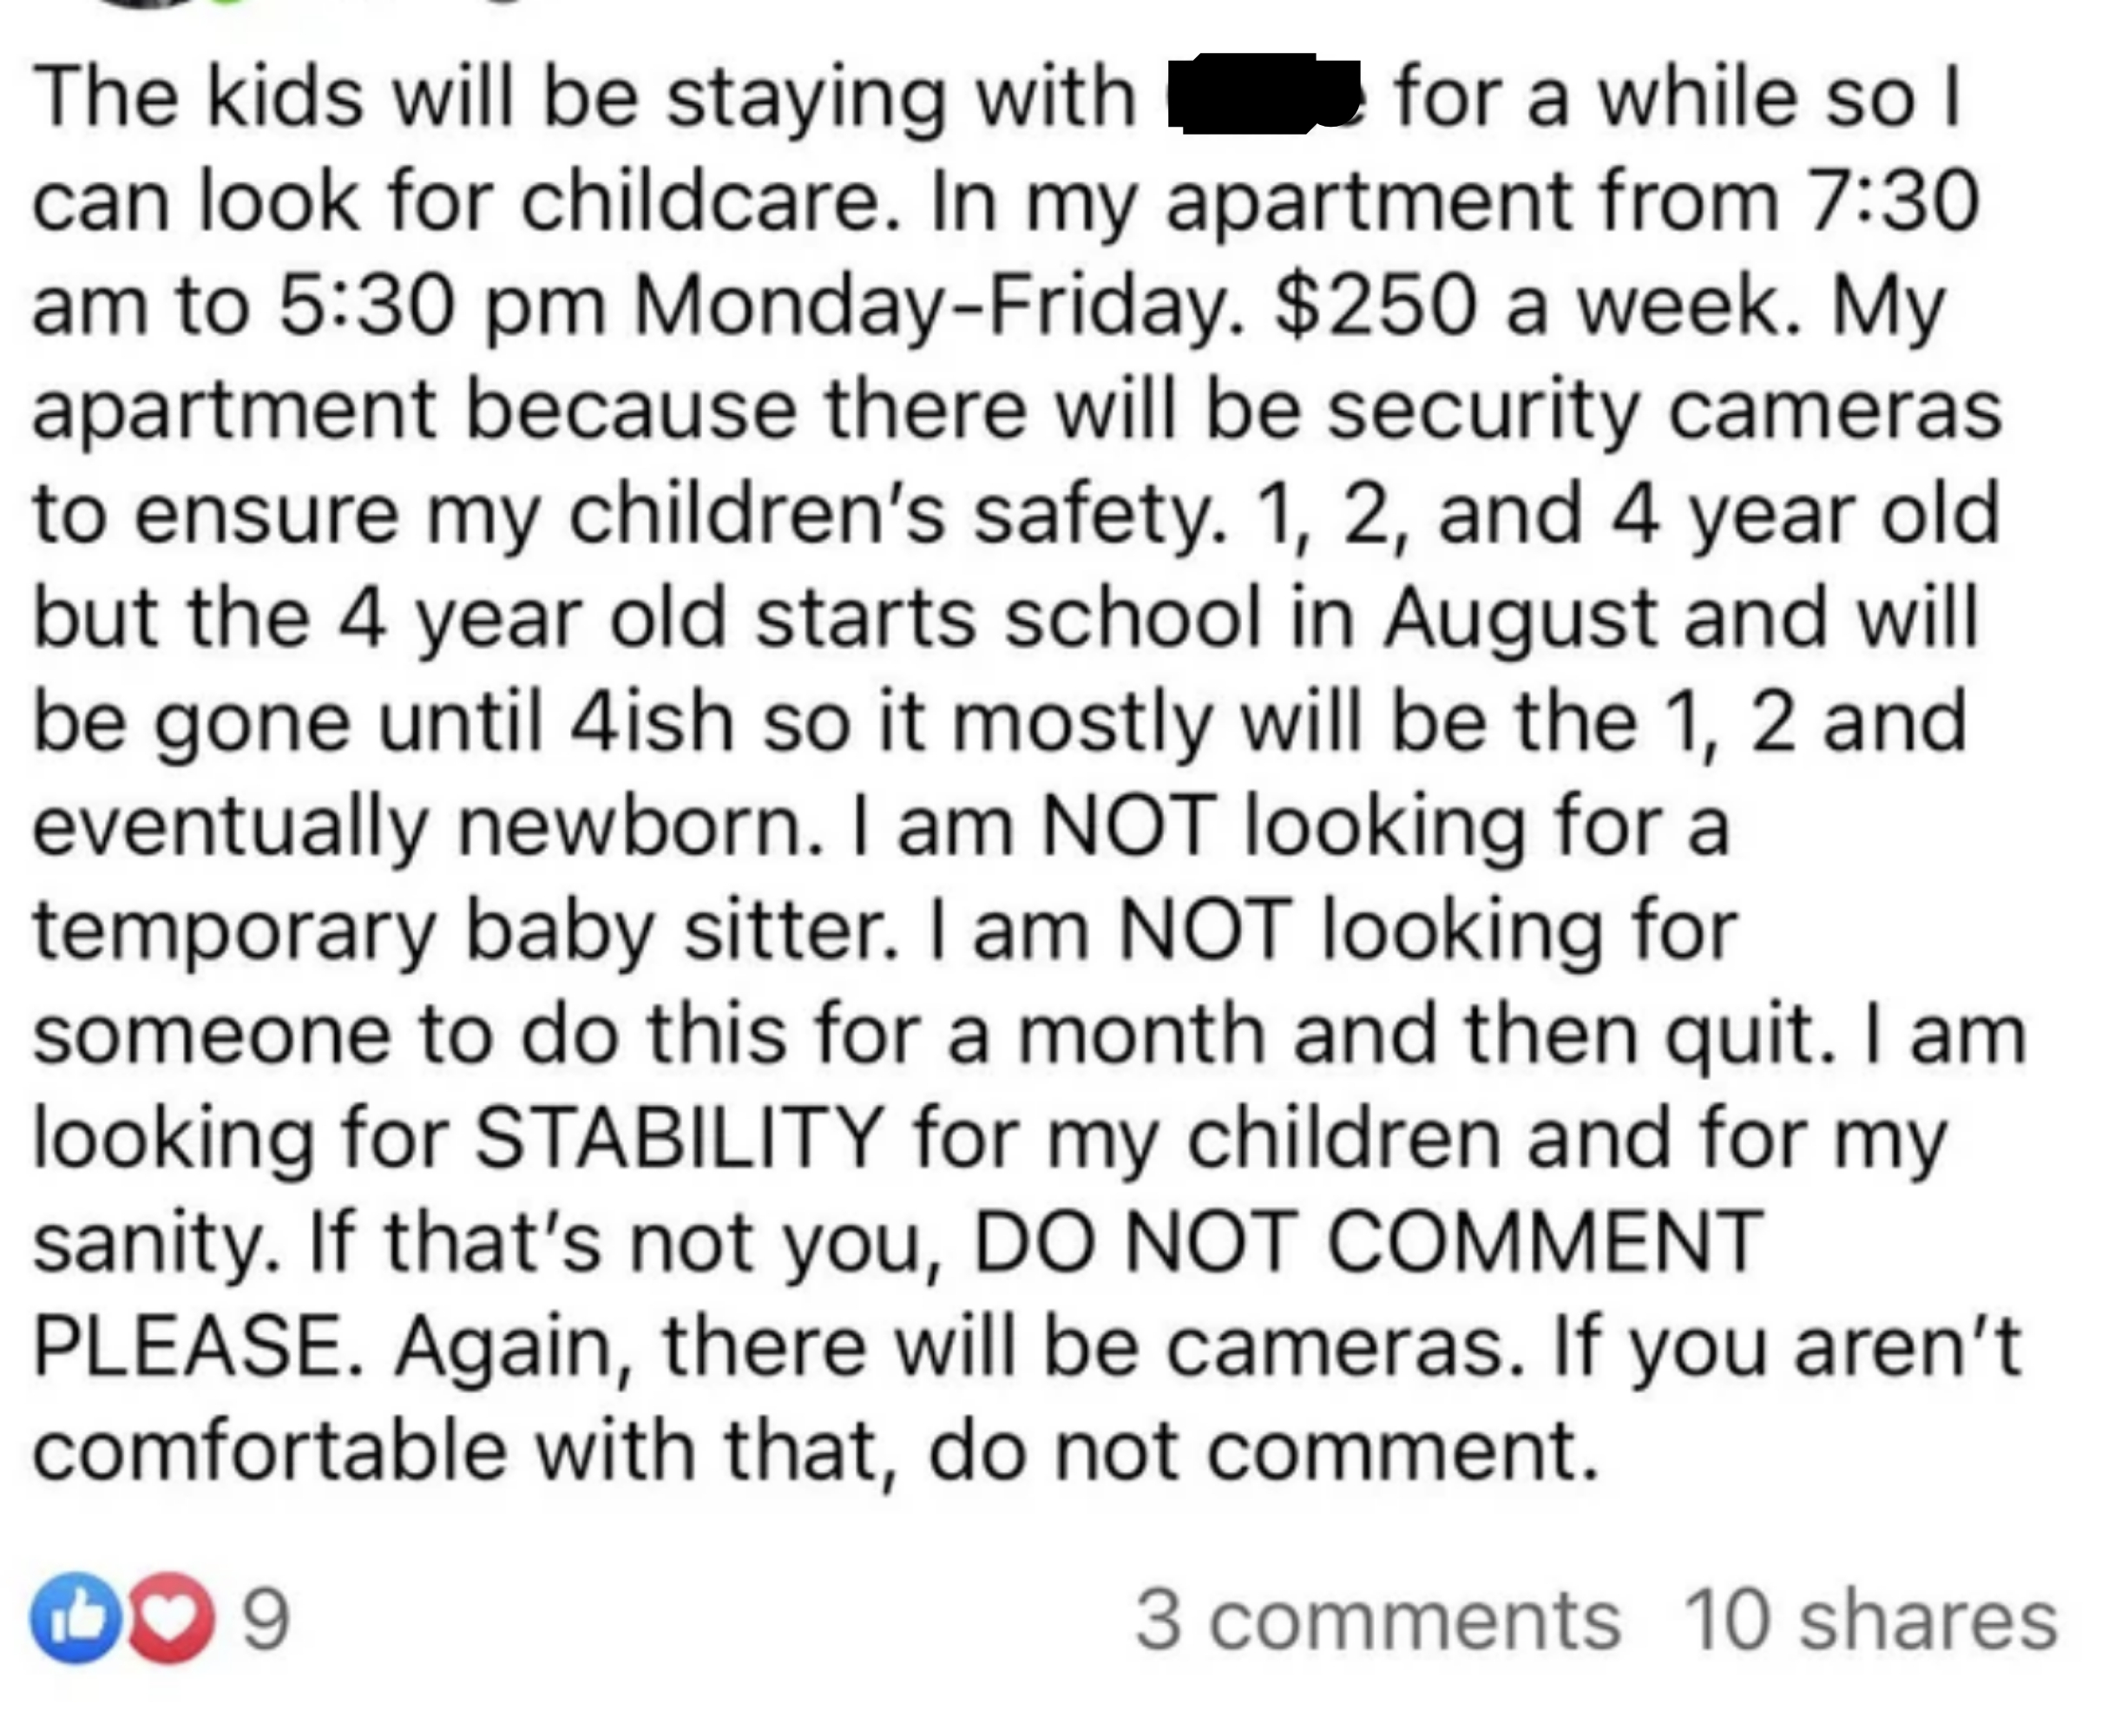 Looking for a long-term, stable babysitter for their three (soon to be four) kids, 1, 2, and 4 years old, 7:30am–5:30pm M–F, $250 a week, in their apt because there are security cameras